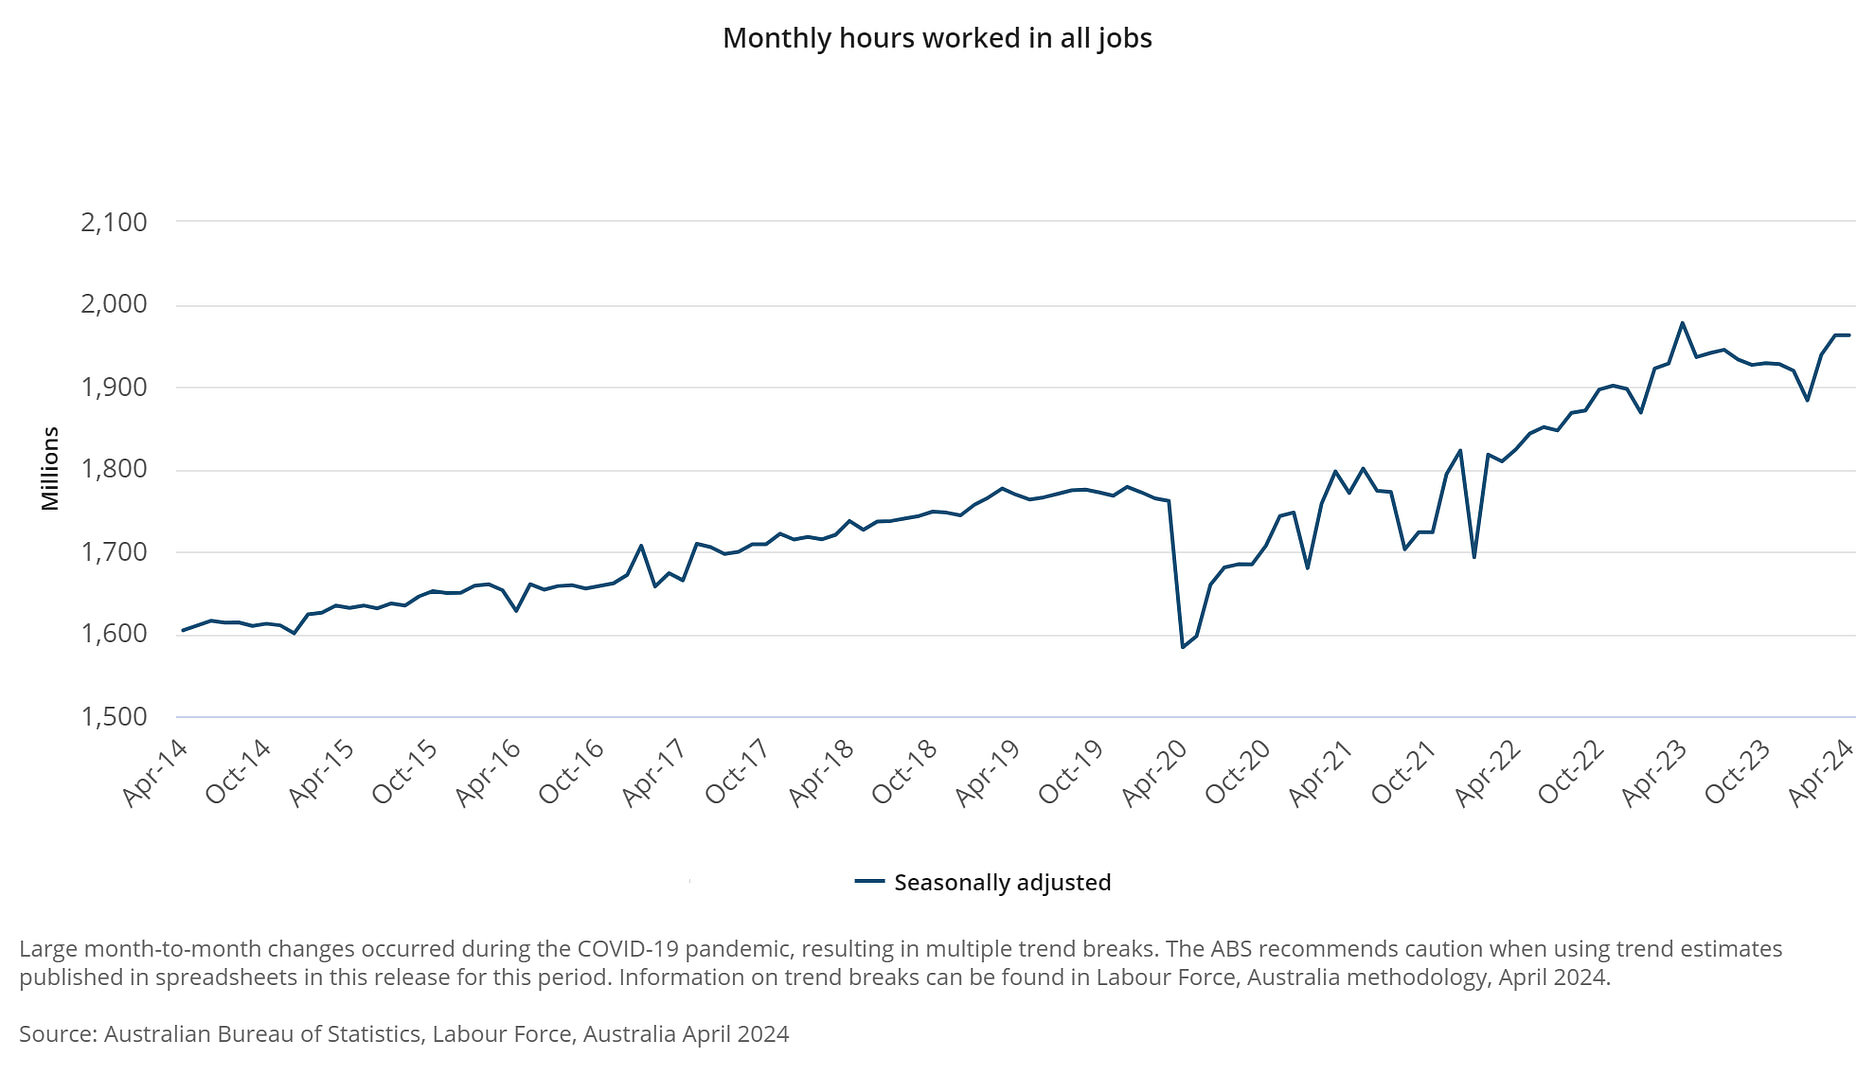 Monthly hours worked in all jobs - April 2024